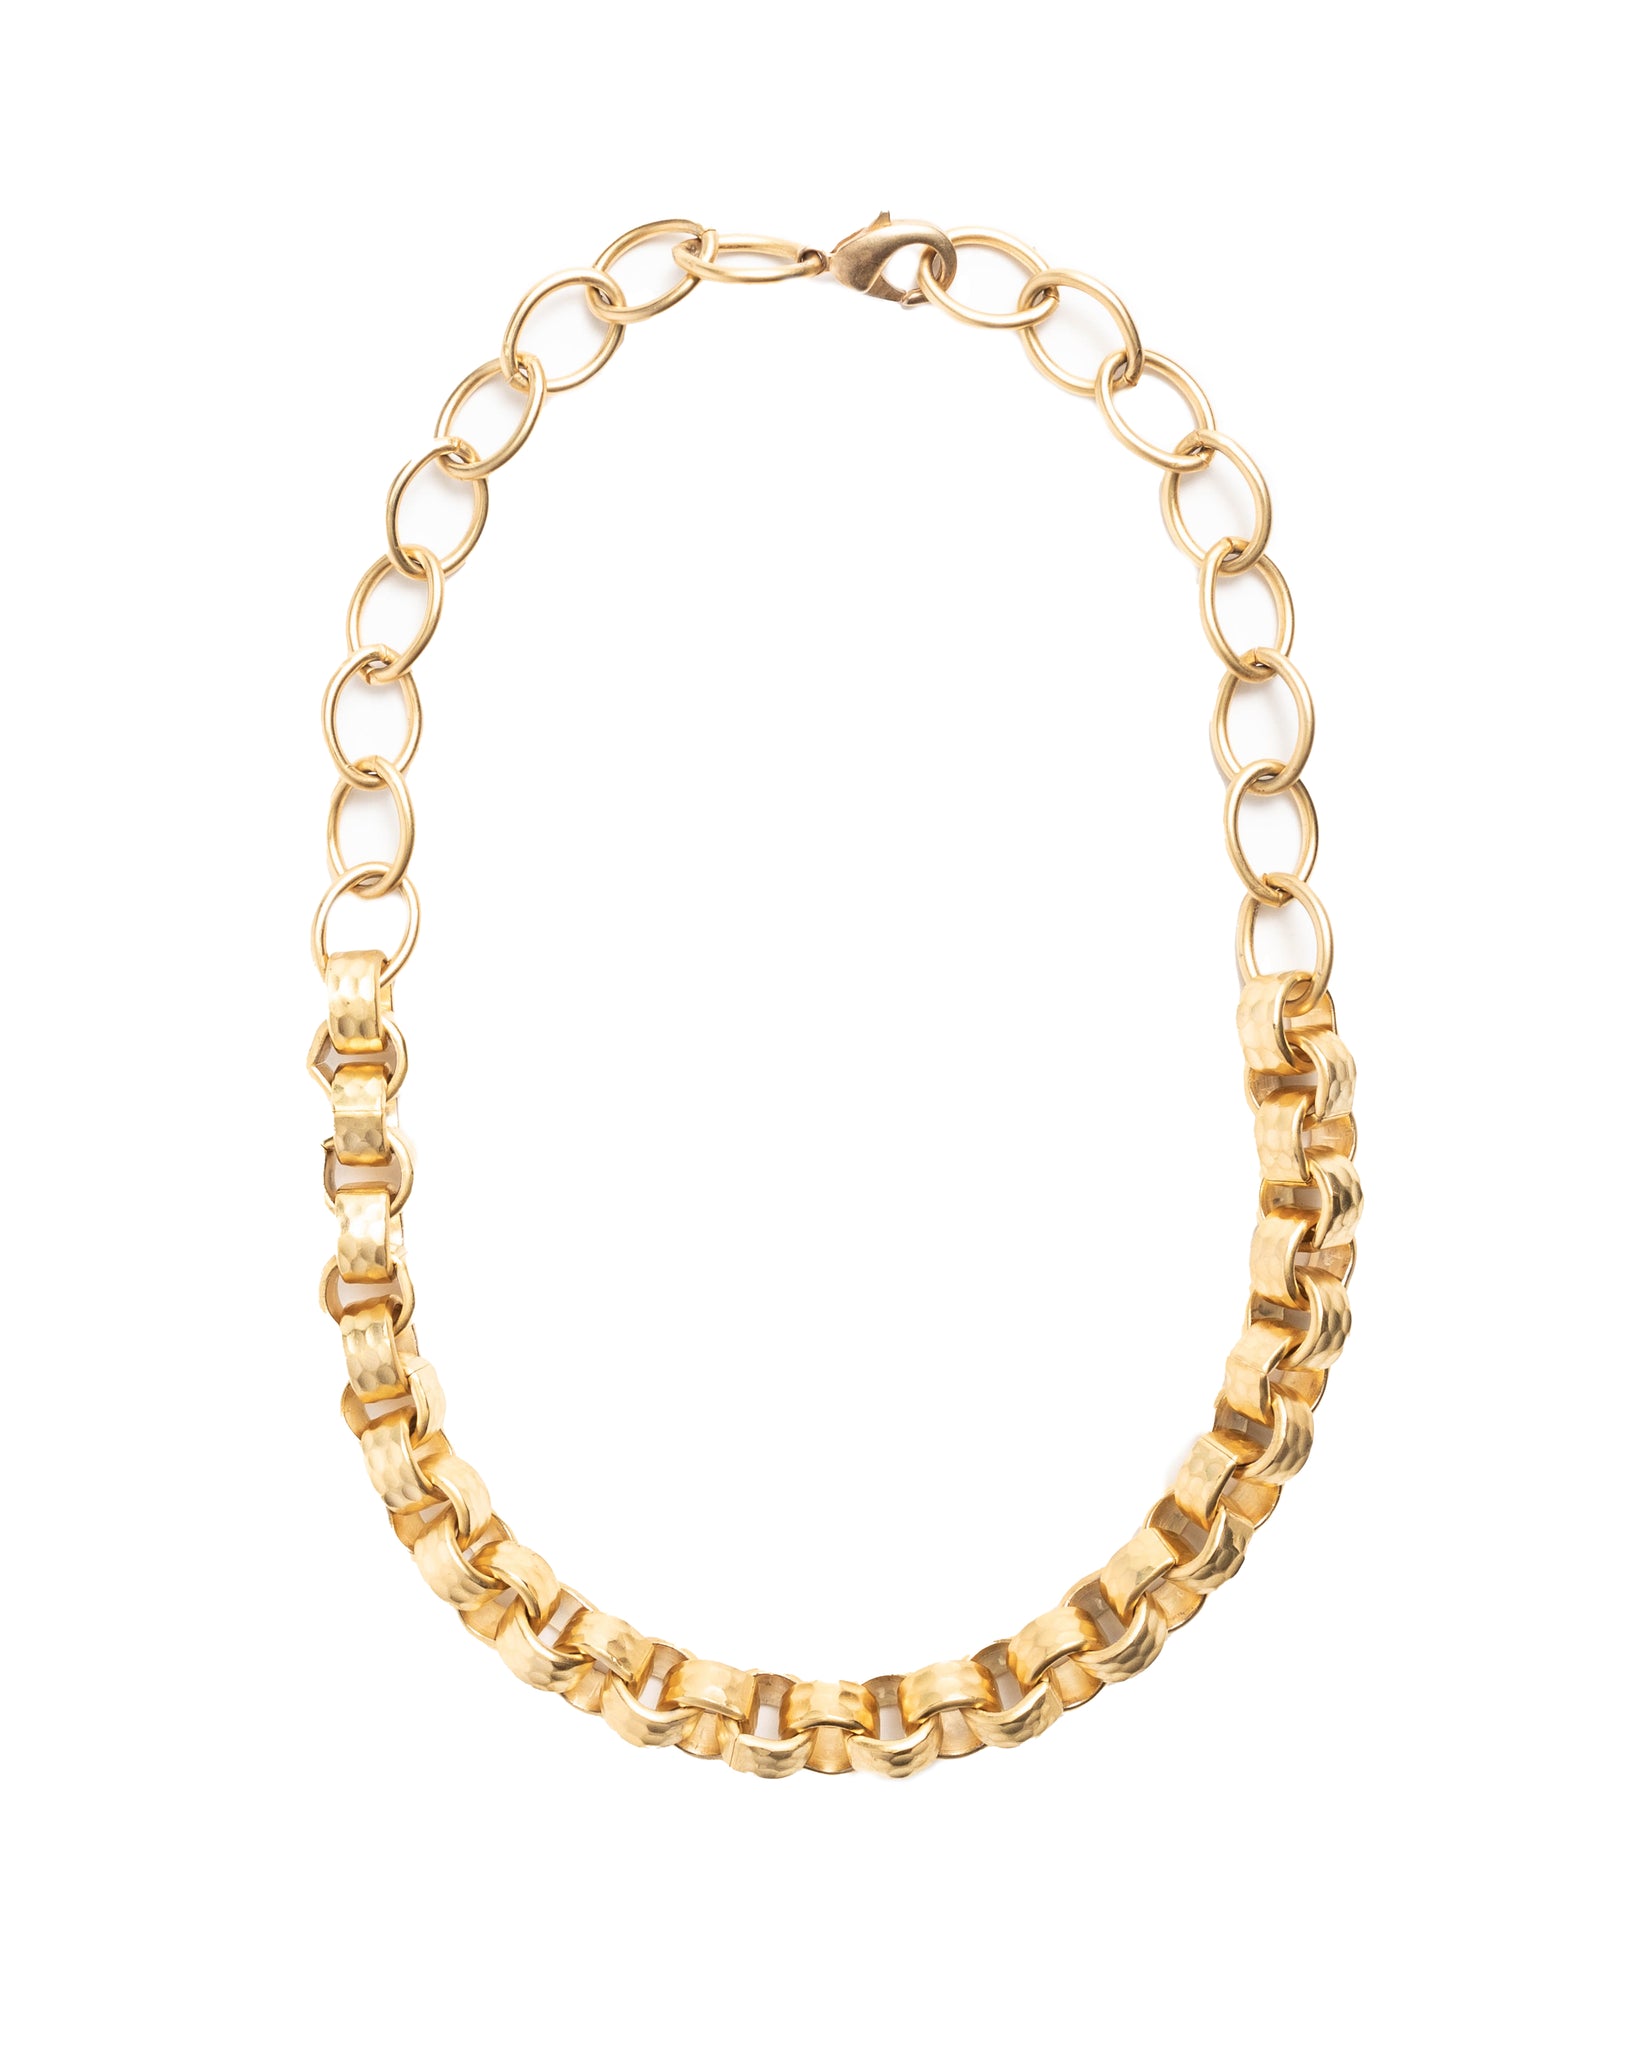 Golden Jumbo Rolo Chain Statement Necklace